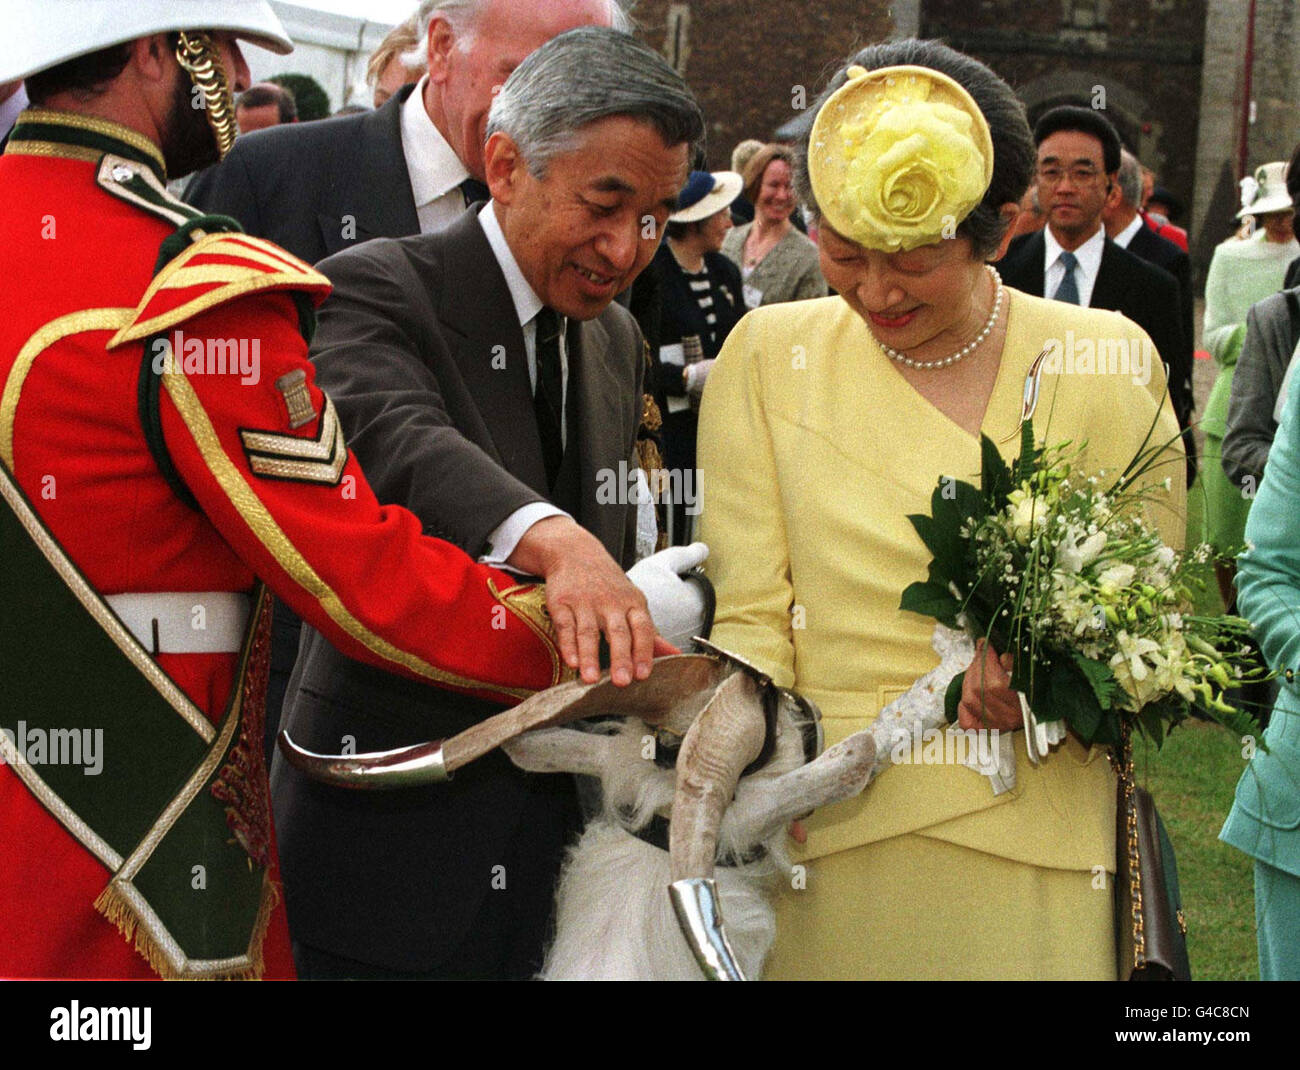 The Japanese Emperor Akihito and Empress Michiko meet Shenkin, a 22-month-old Royal Windsor White Goat who is Regimental mascot for the 2nd Battalion of the Royal Regiment of Wales, during their visit to Cardiff Castle in Wales, today(Wednesday) May 27 as part of their five-day state visit to Britain. (PA/WPA Pool/Louisa Buller) Stock Photo